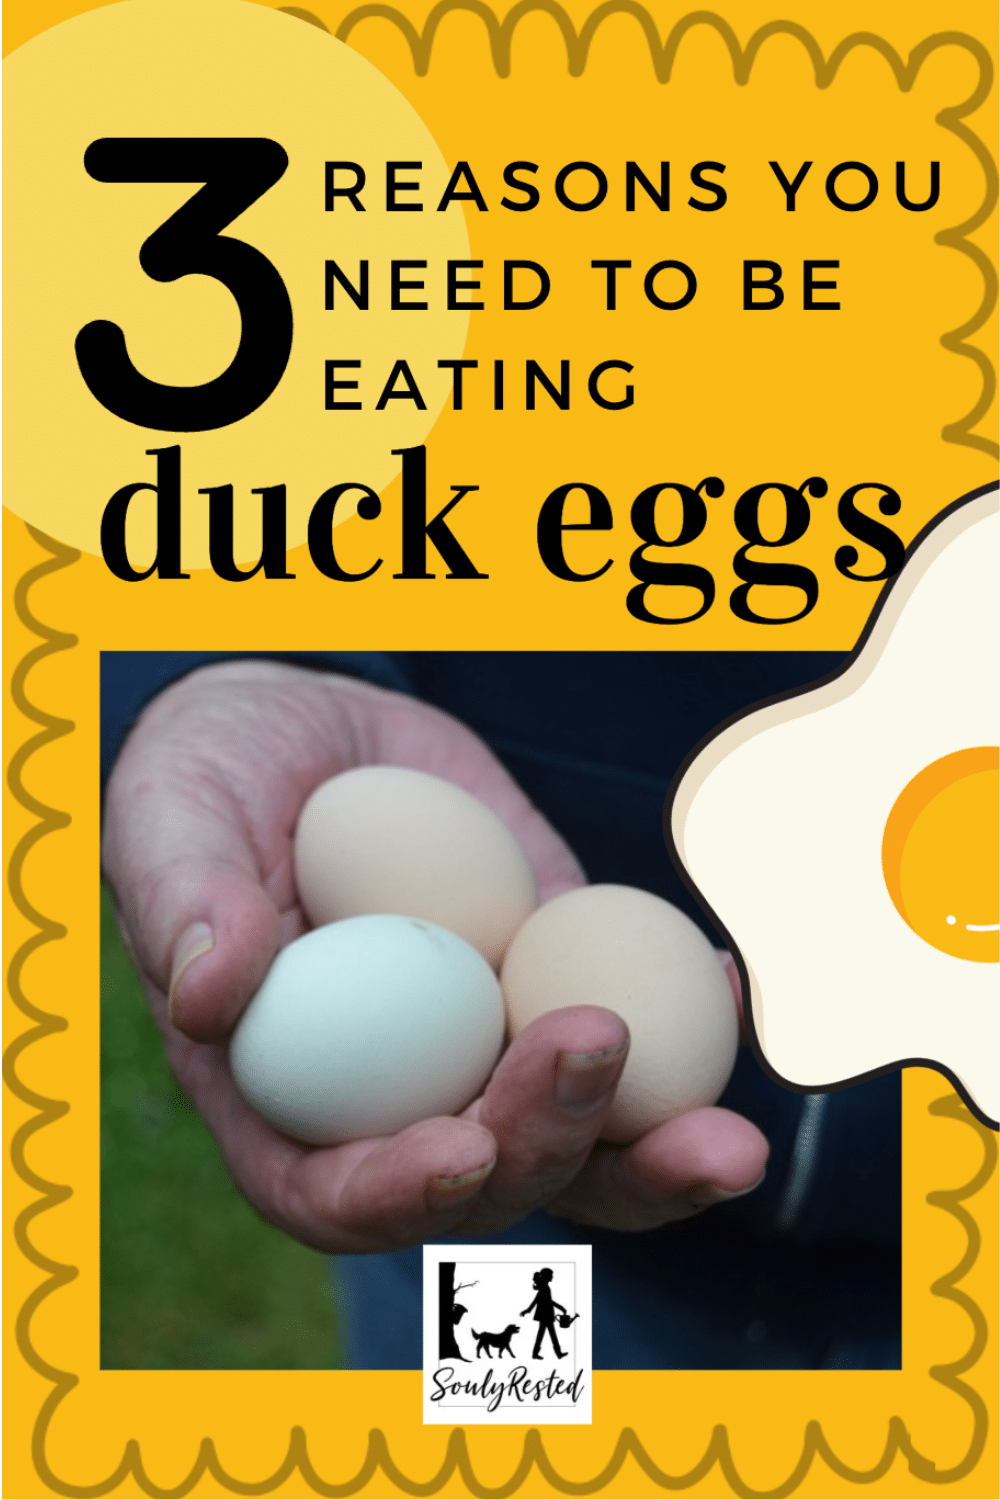 3 reasons you need to be eating duck eggs